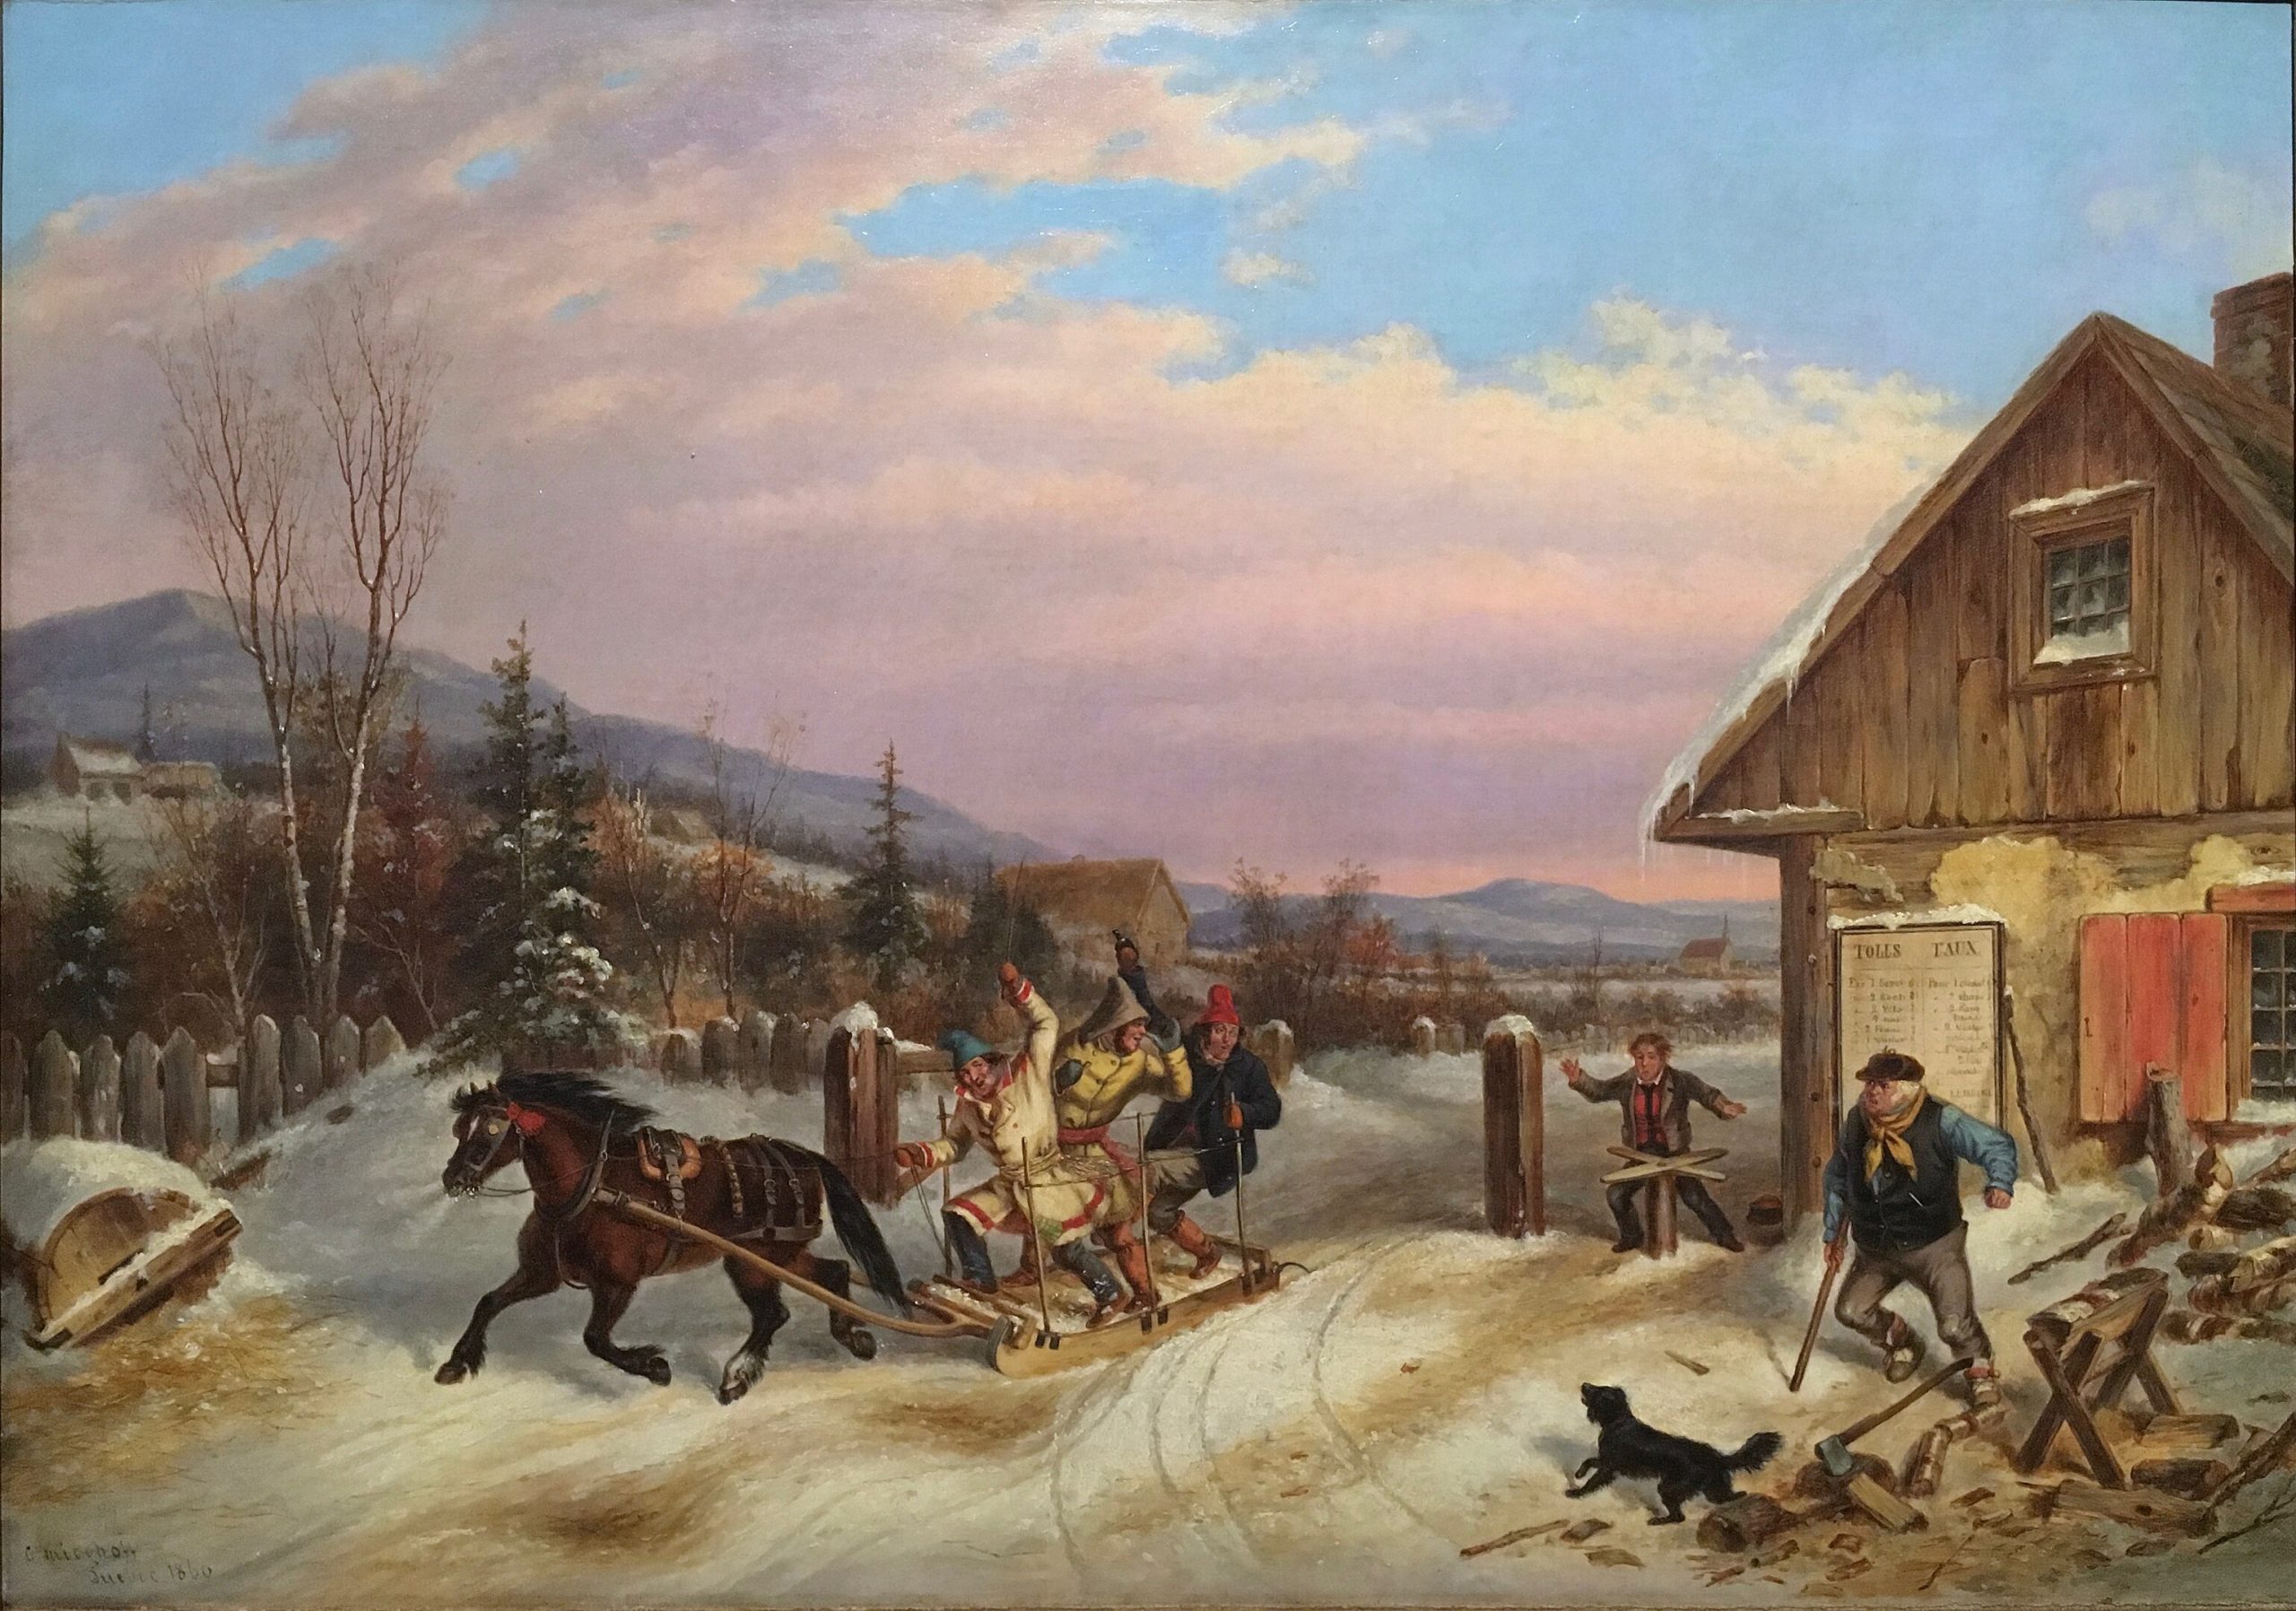 Three men riding off on a sled pulled by a horse as shop owners watch in dismay